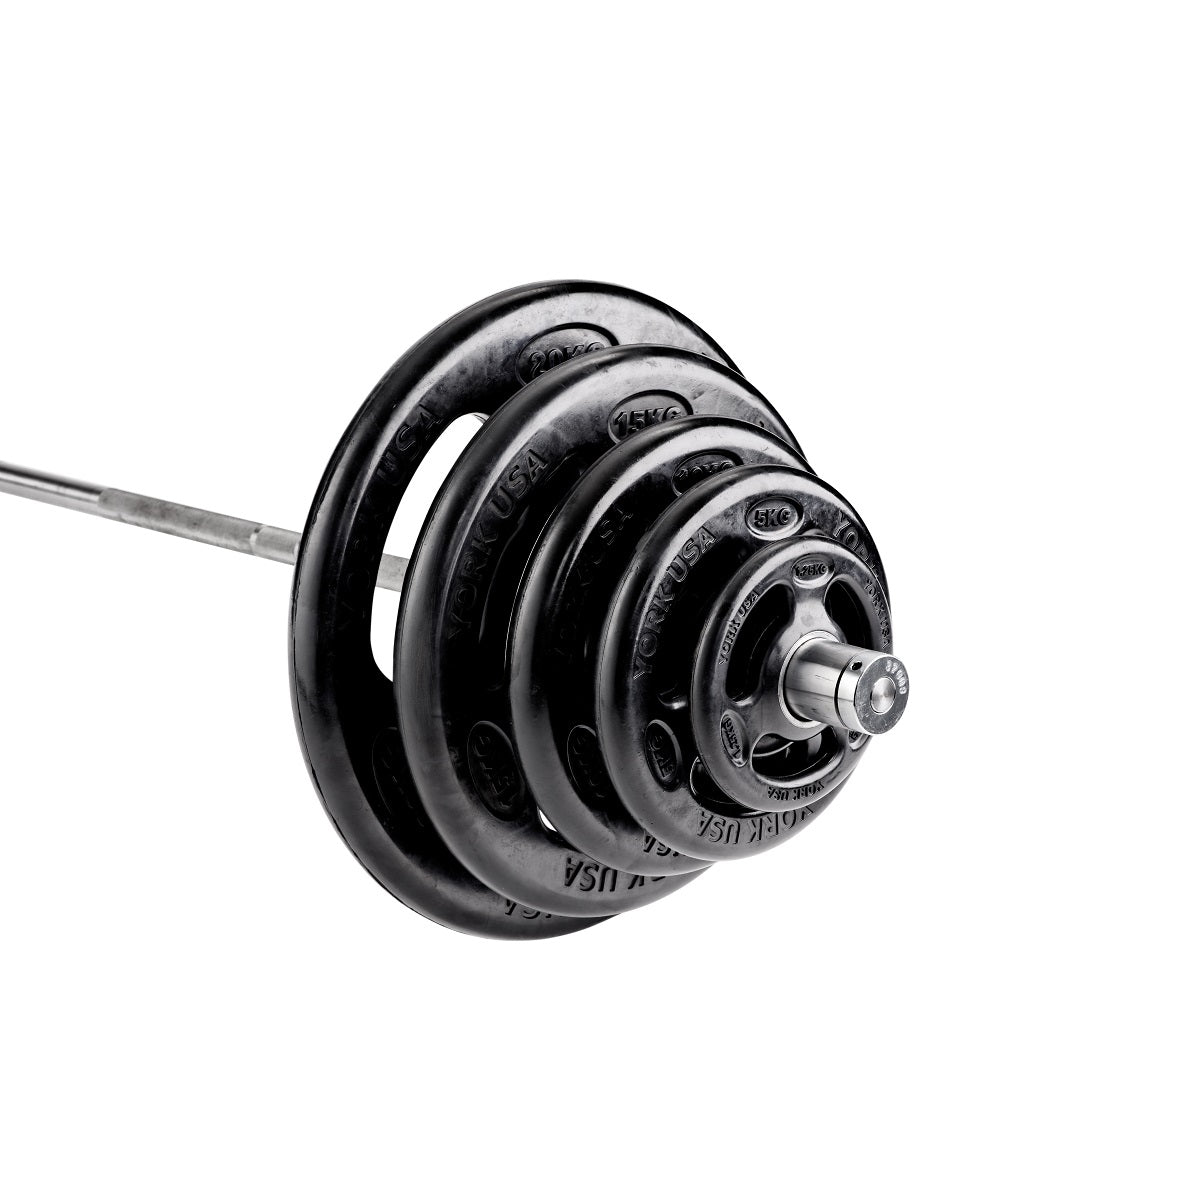 York Barbell ISO-Grip Rubber Olympic Weight Plates, York Fitness